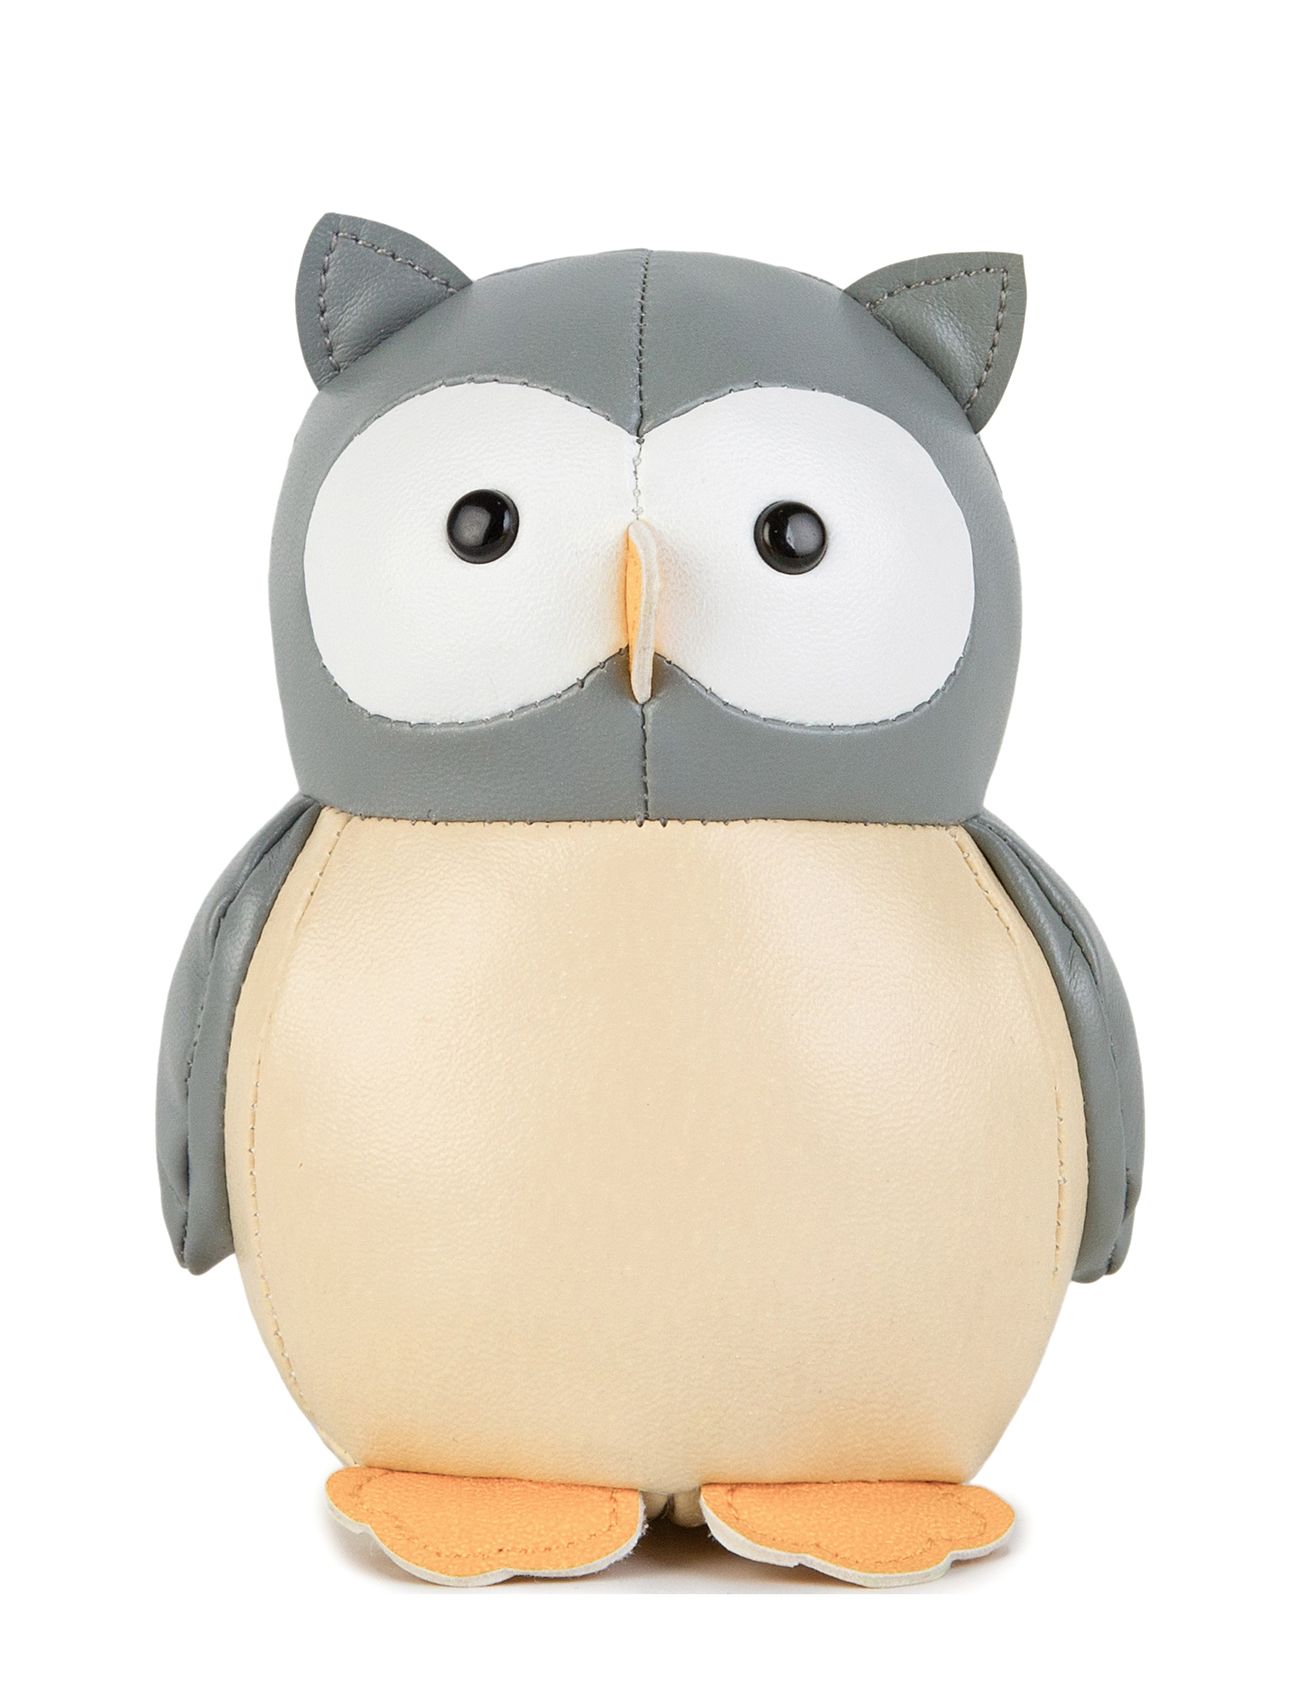 Tiny Friends - Colette The Owl Toys Soft Toys Stuffed Animals Grey Little Big Friends